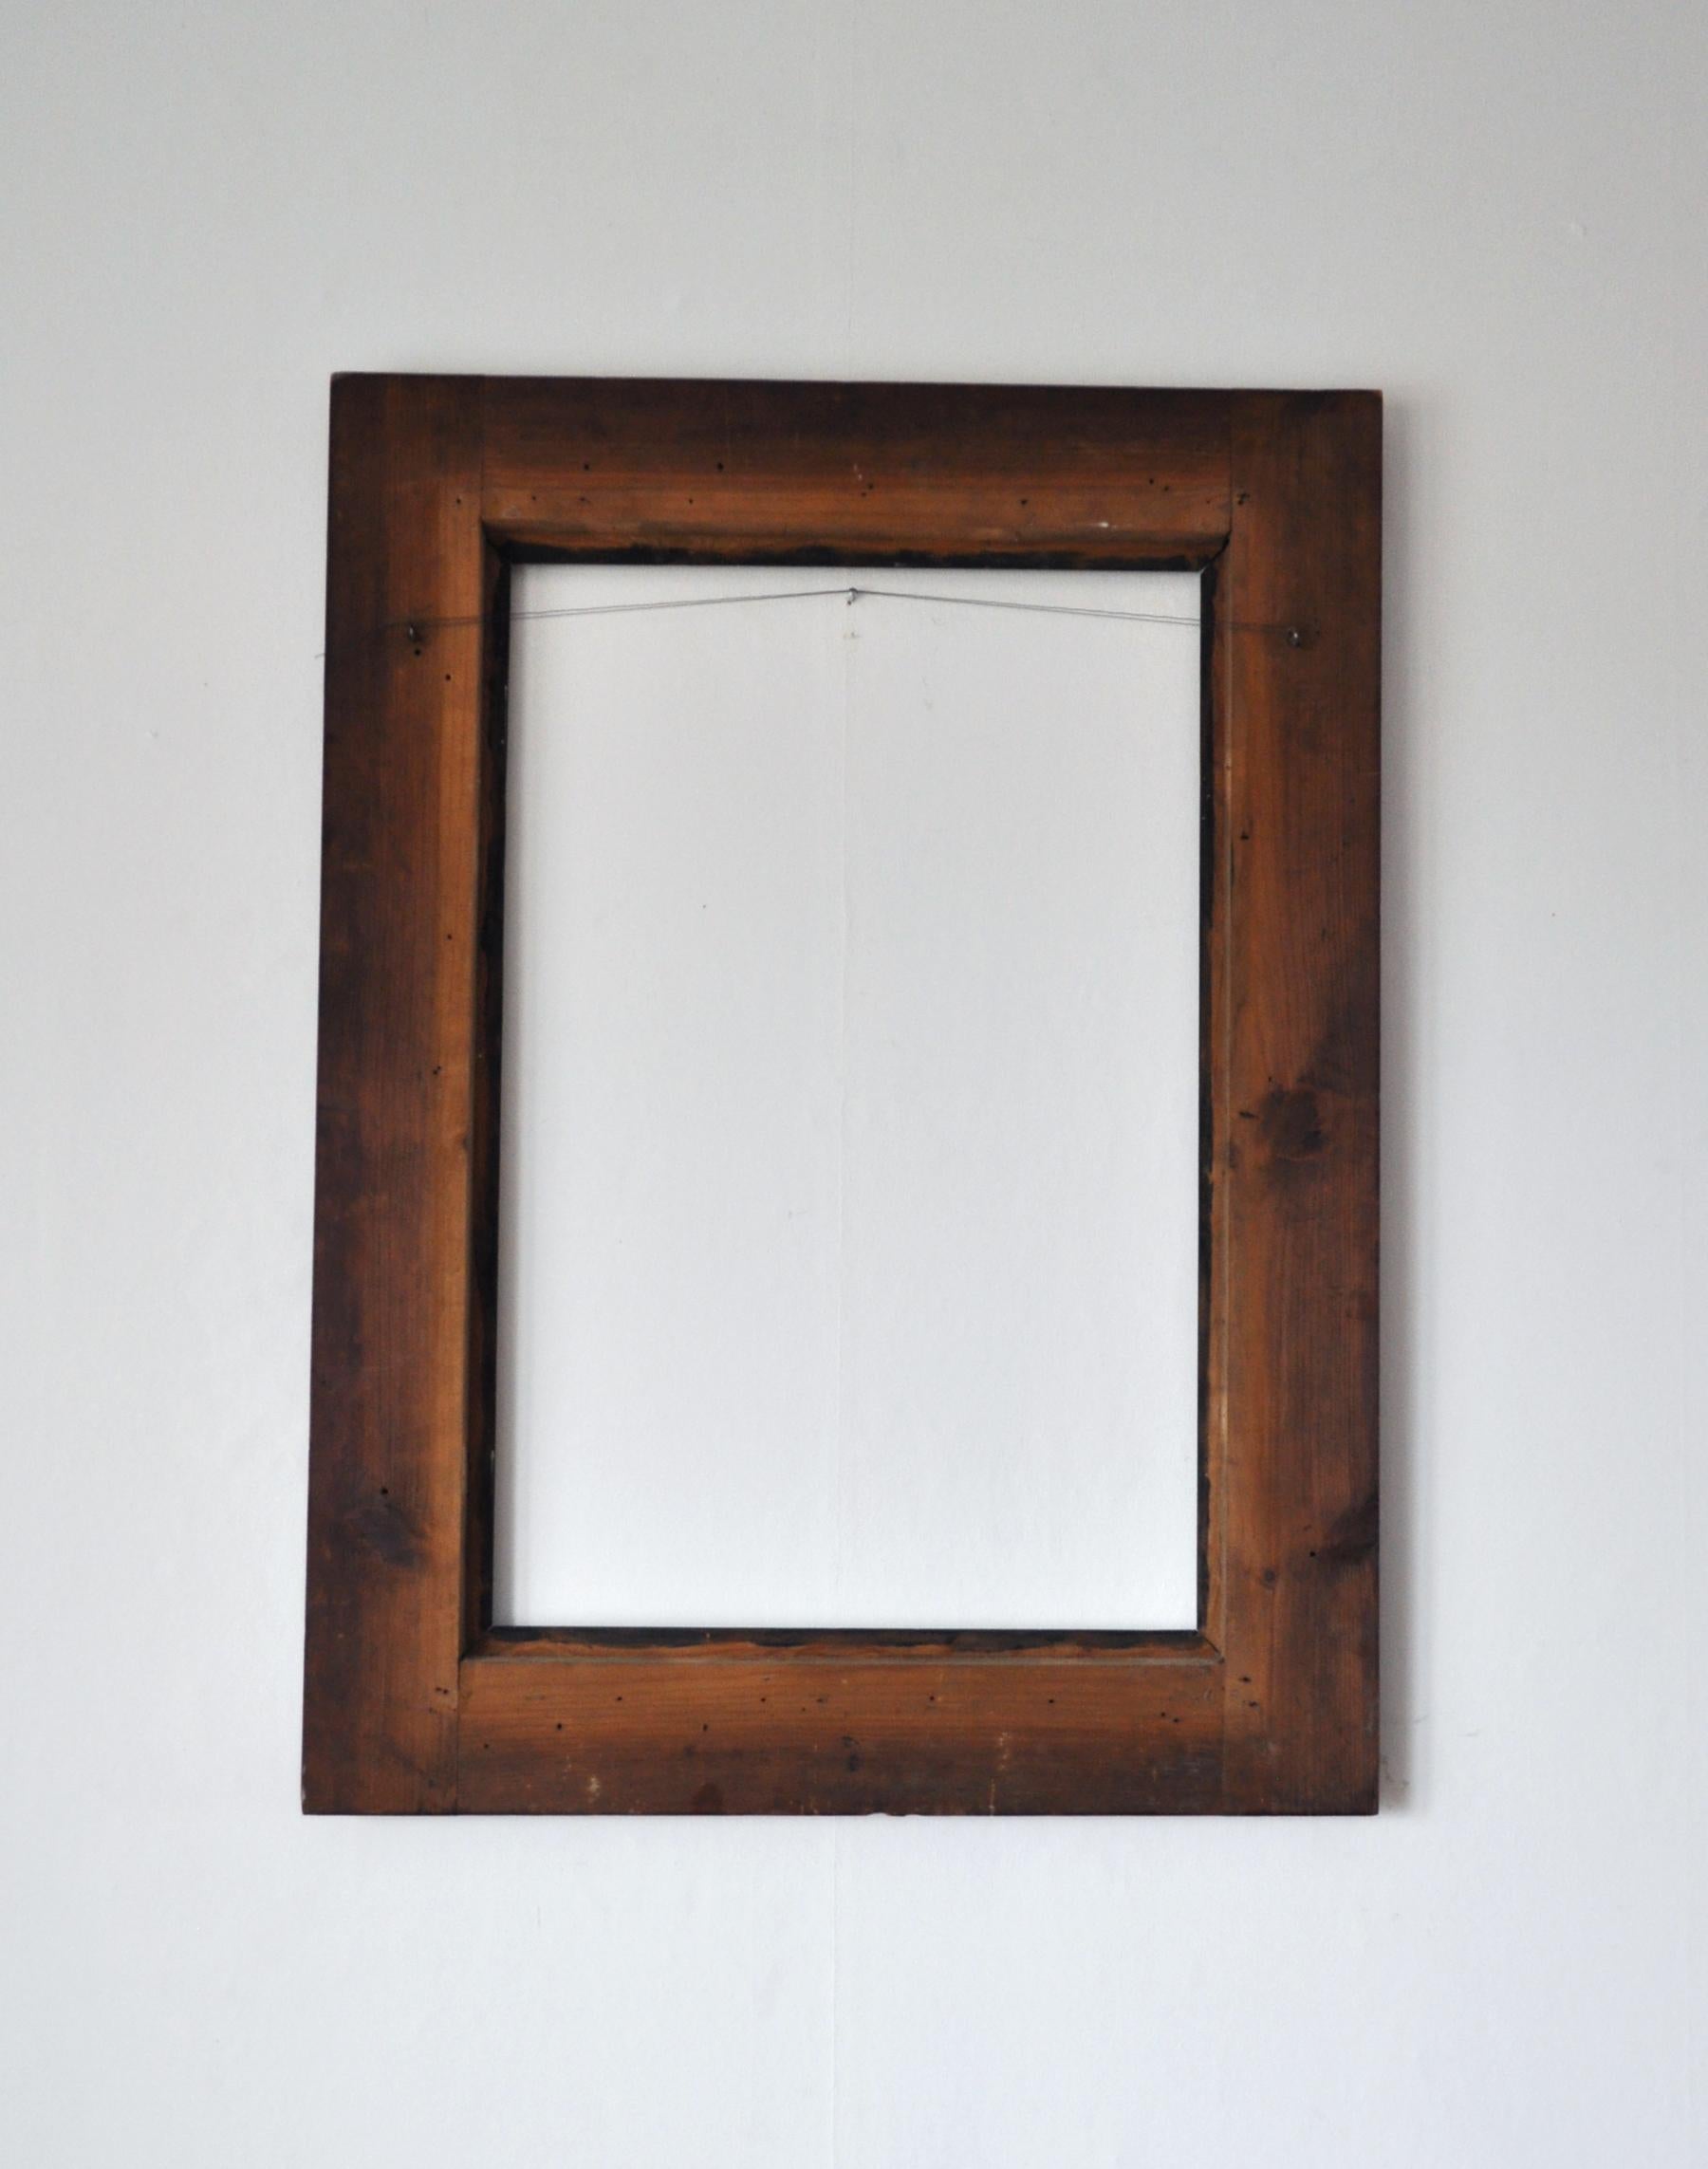 Early 20th Century Painting or Mirror Frame 1